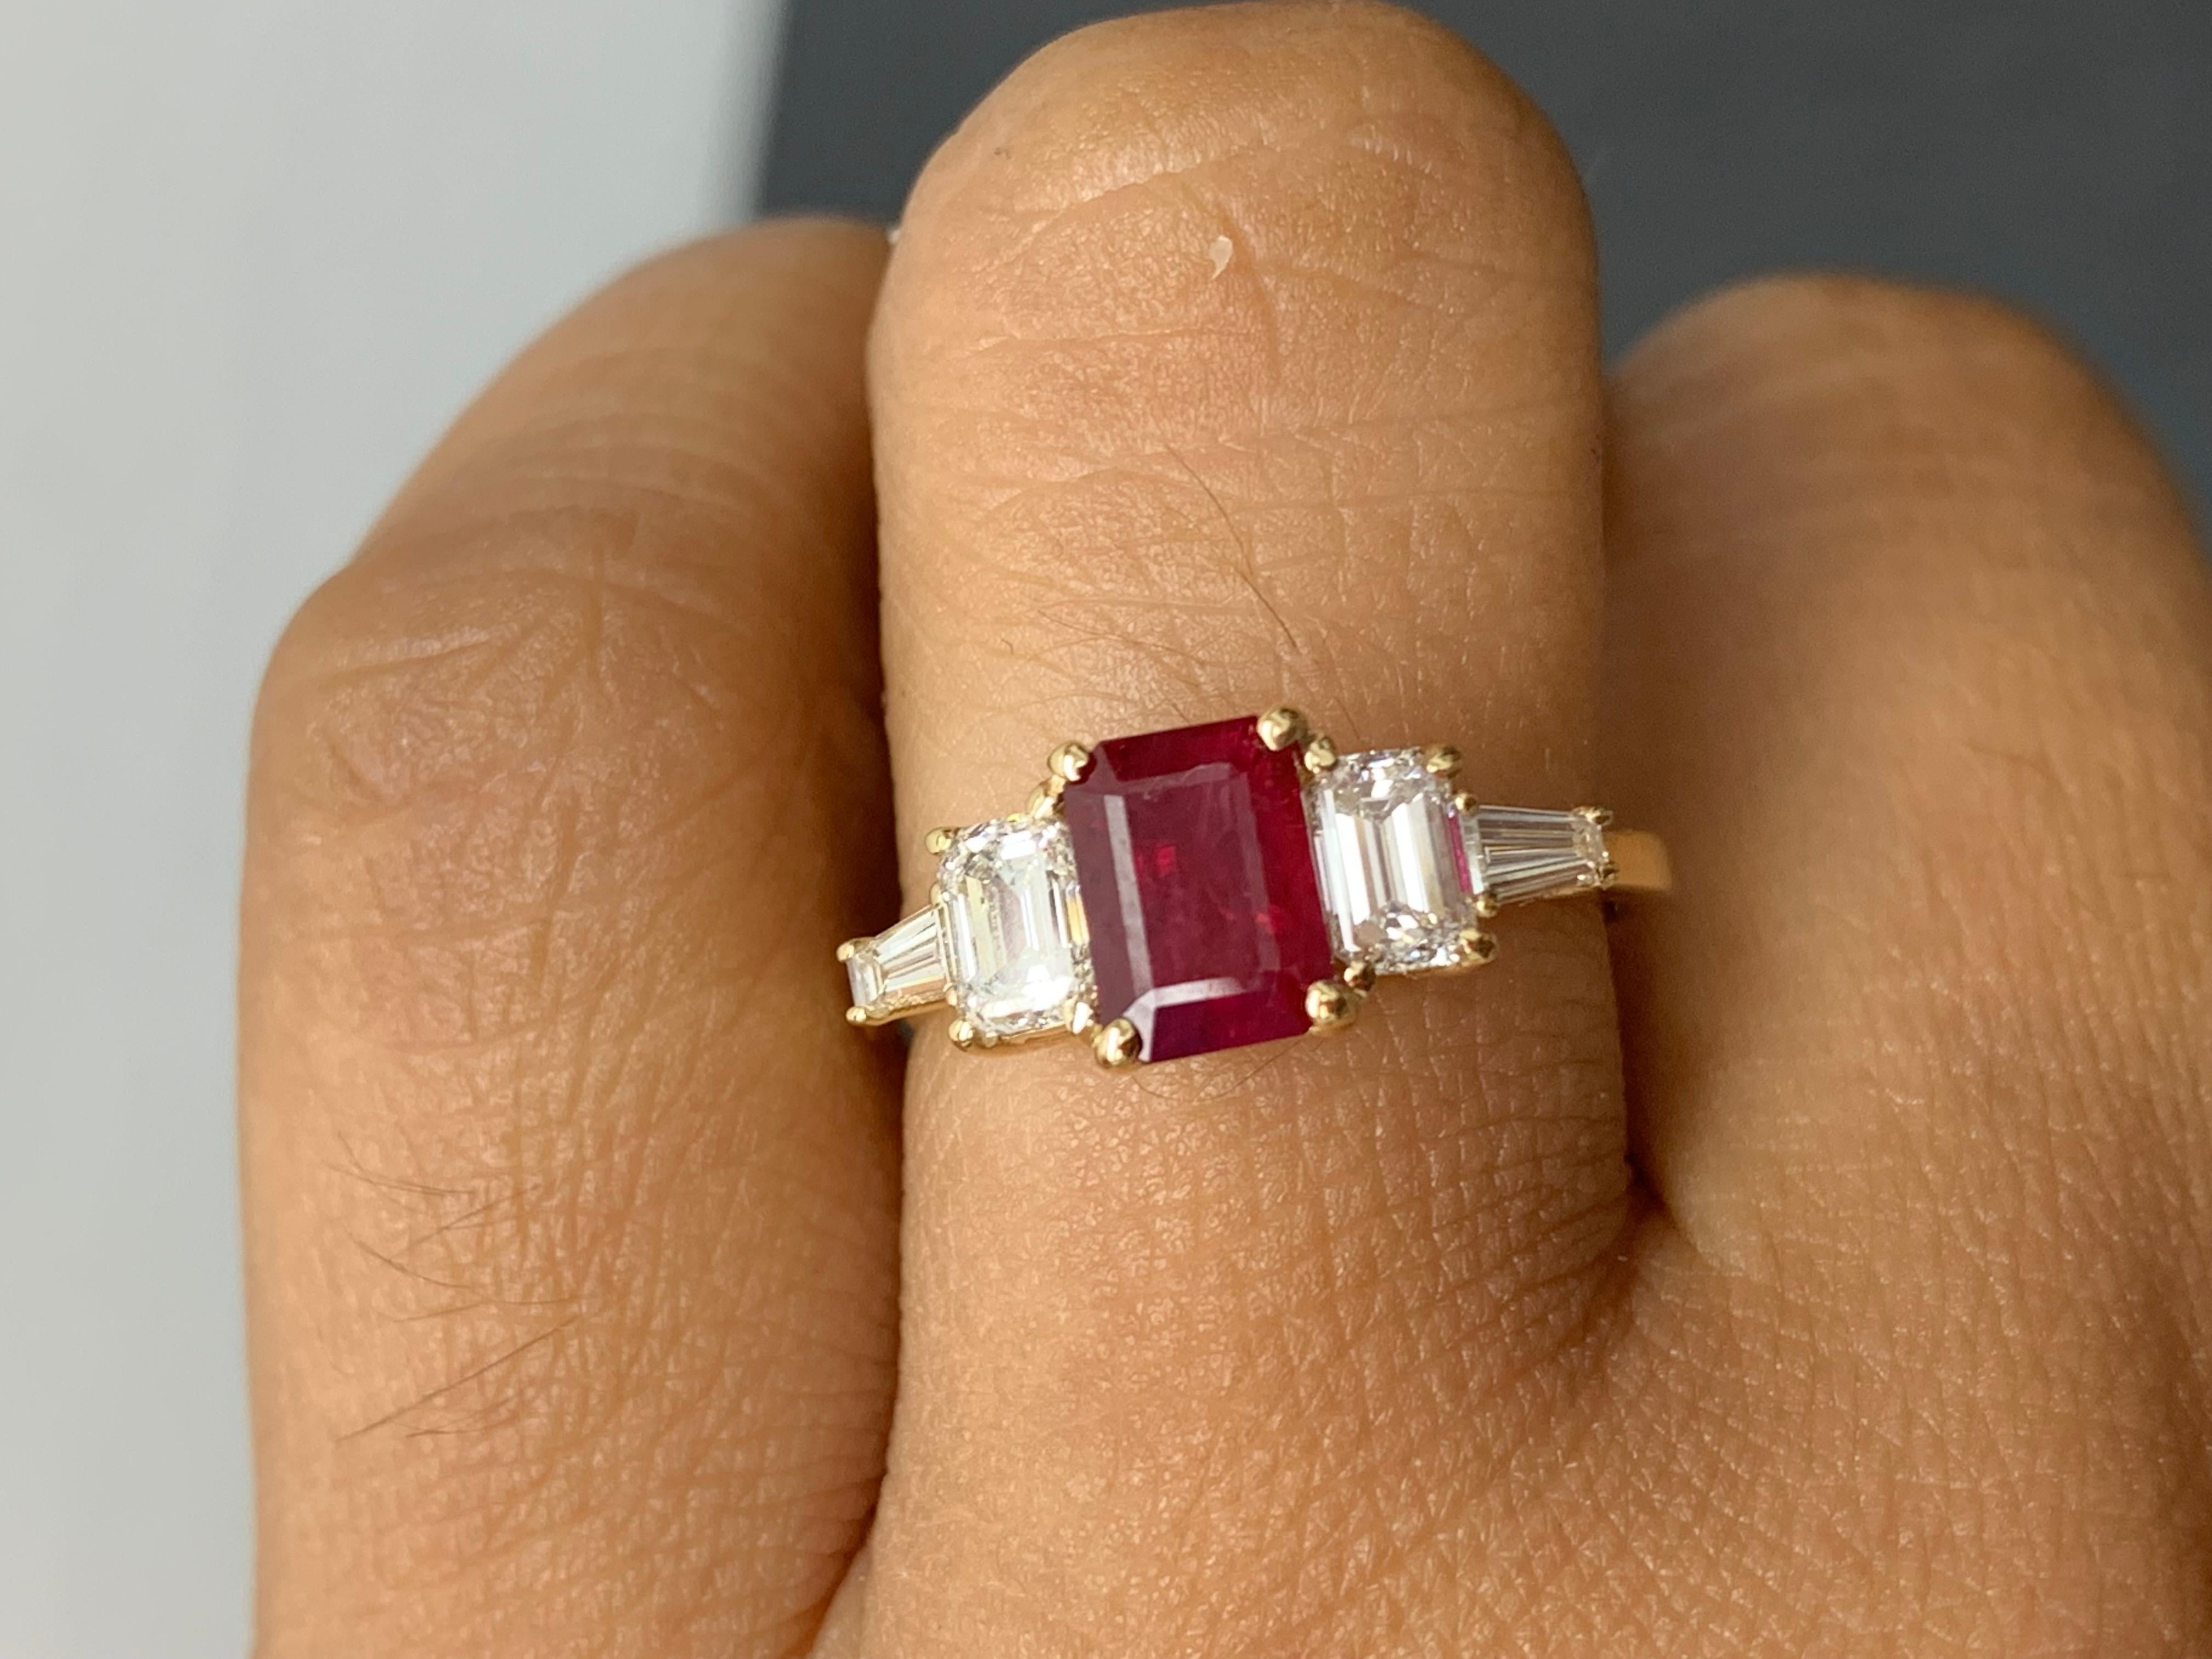 Women's 1.04 Carat Emerald Cut Ruby and Diamond 5 Stone Ring in 14K Yellow Gold For Sale